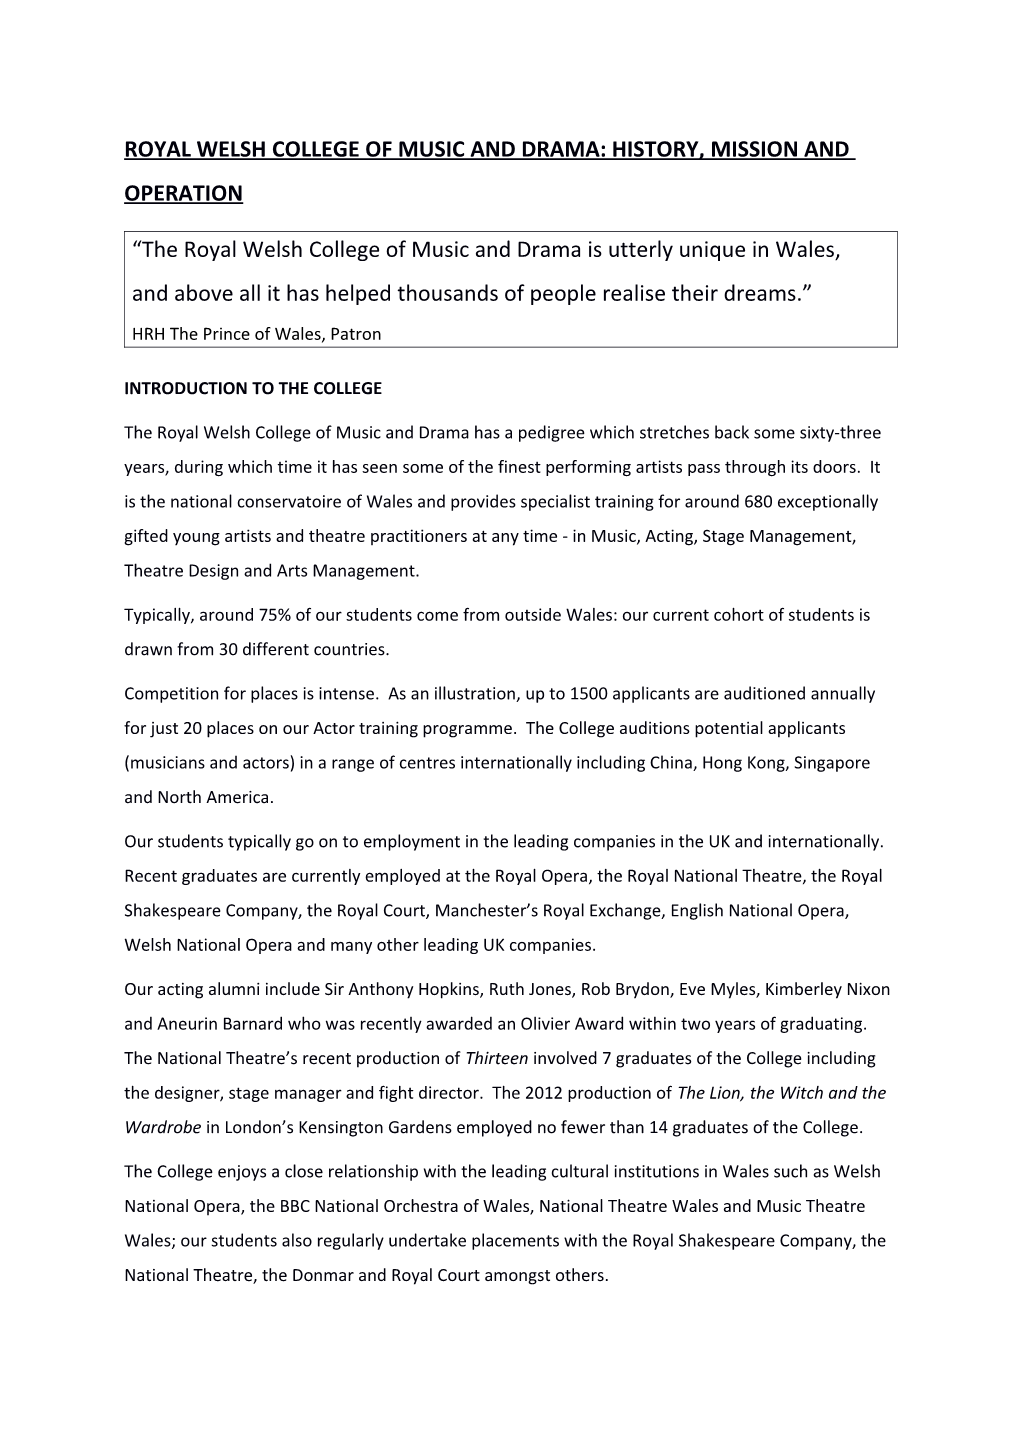 Royal Welsh College of Music and Drama: History, Mission and Operation